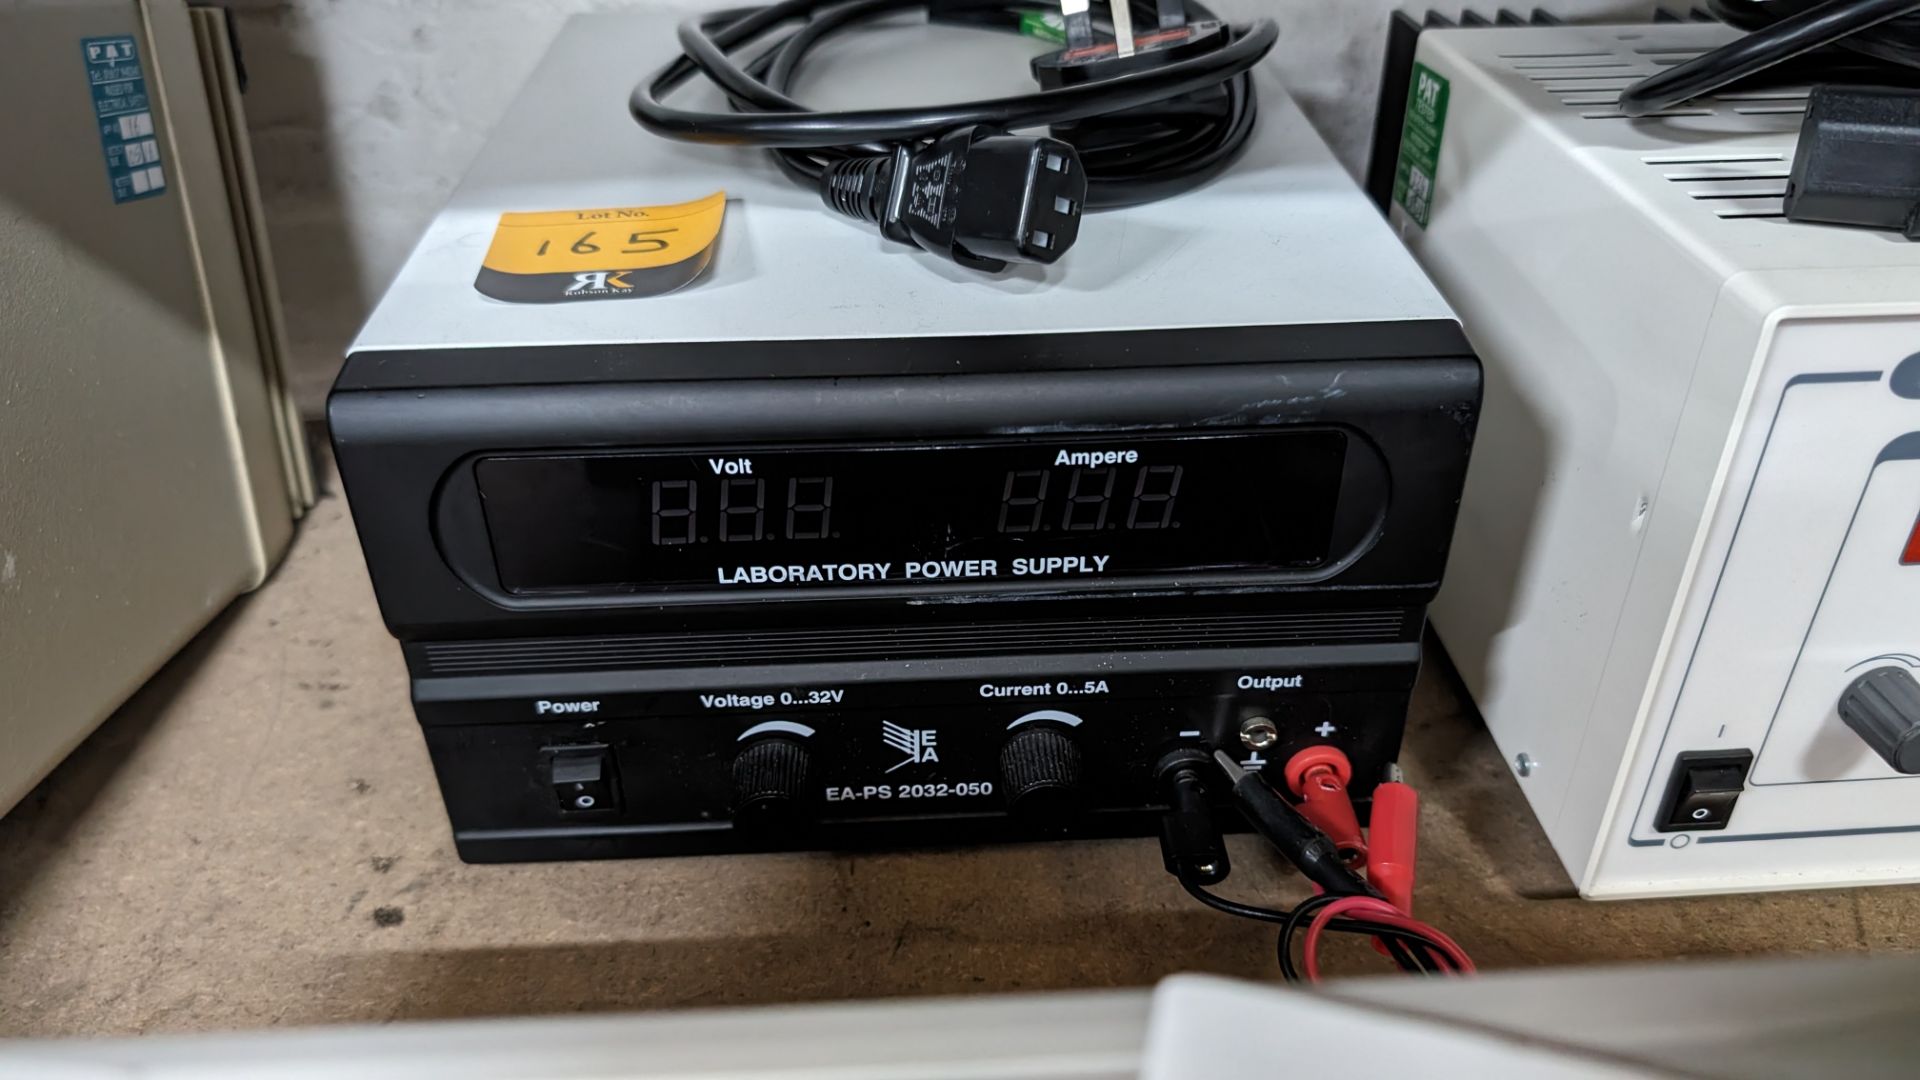 EA-PS 2032-050 laboratory power supply - Image 3 of 4